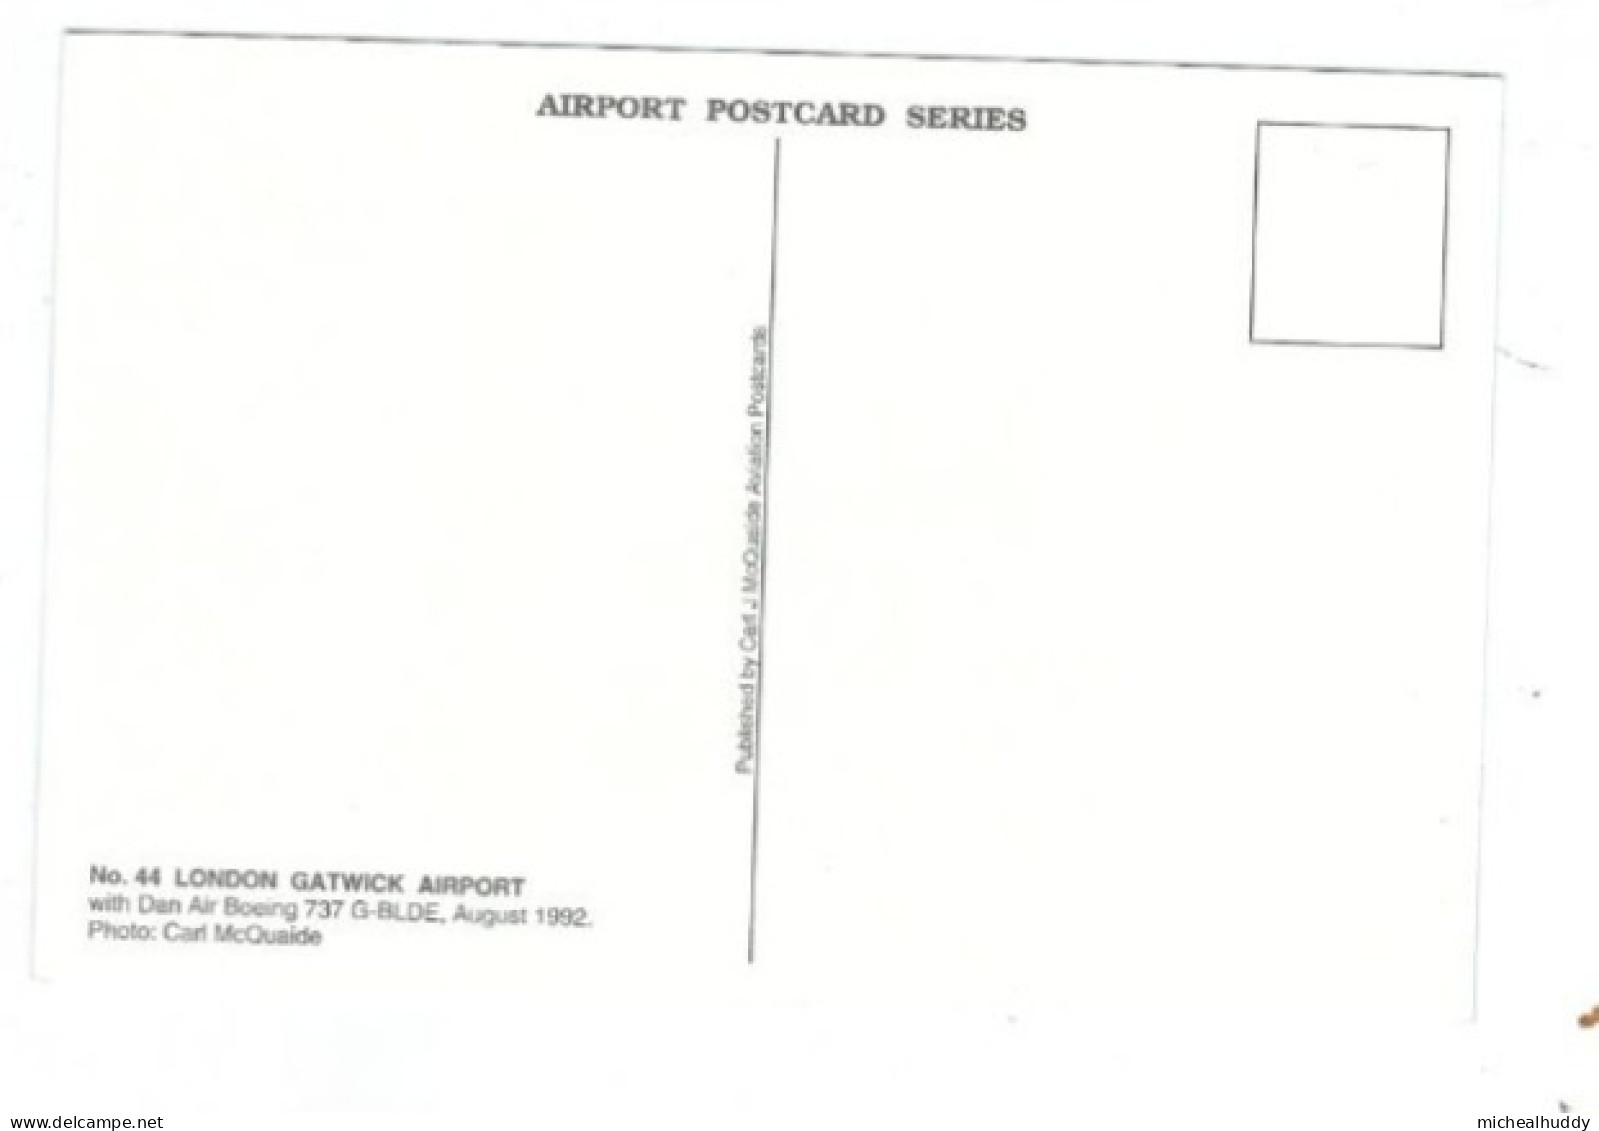 POSTCARD   PUBL BY  BY C MCQUAIDE IN HIS AIRPORT SERIES  LONDON GATWICK   CARD N0  44 - Aerodrome